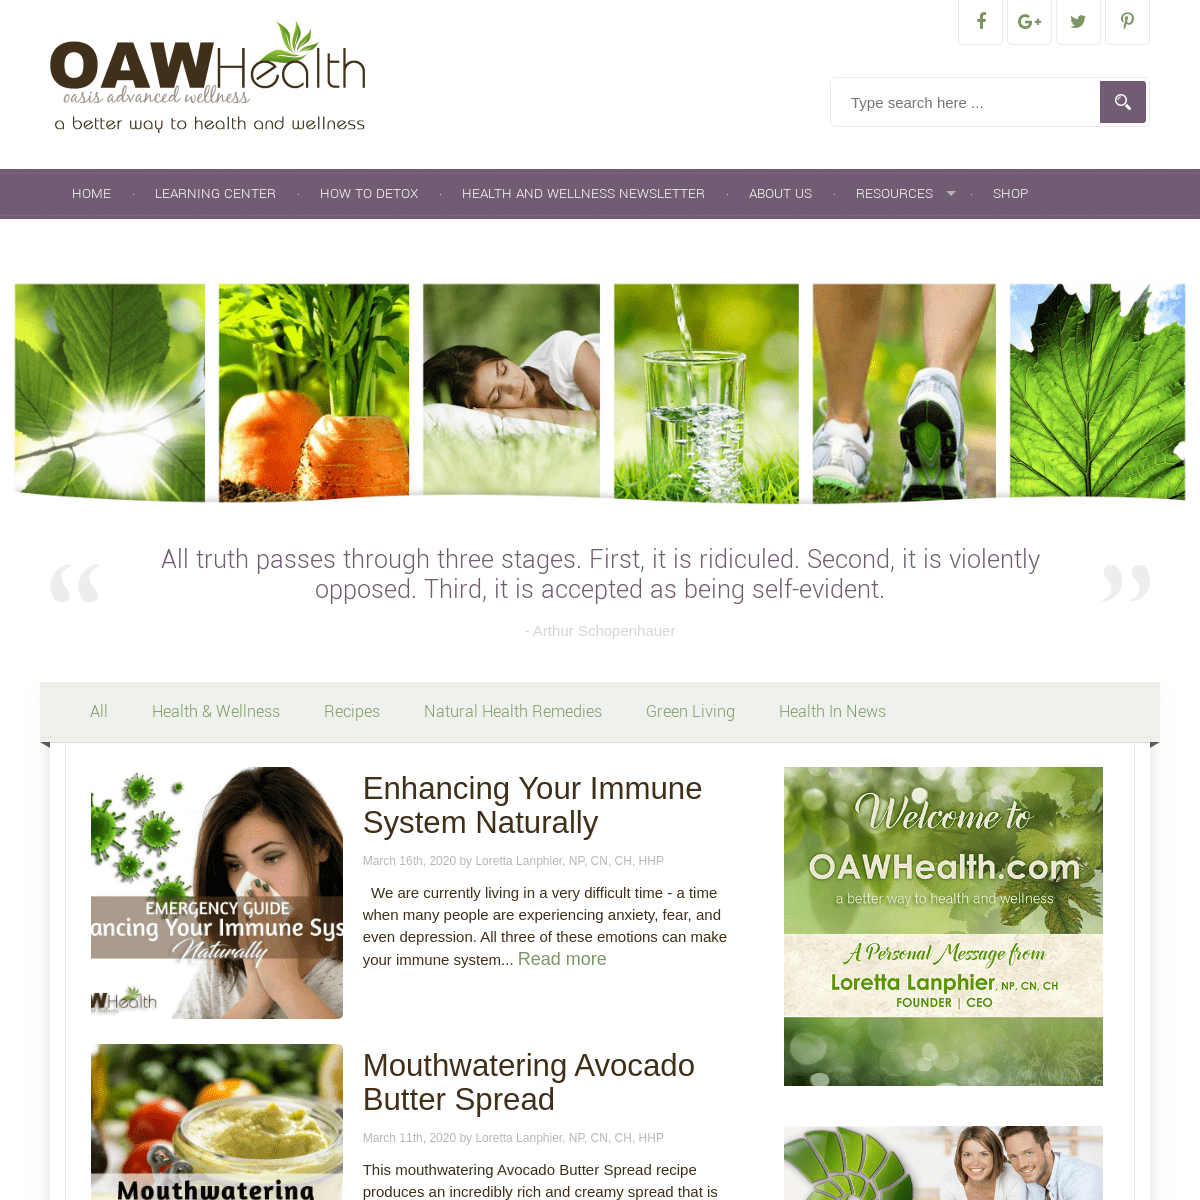 A complete backup of oawhealth.com